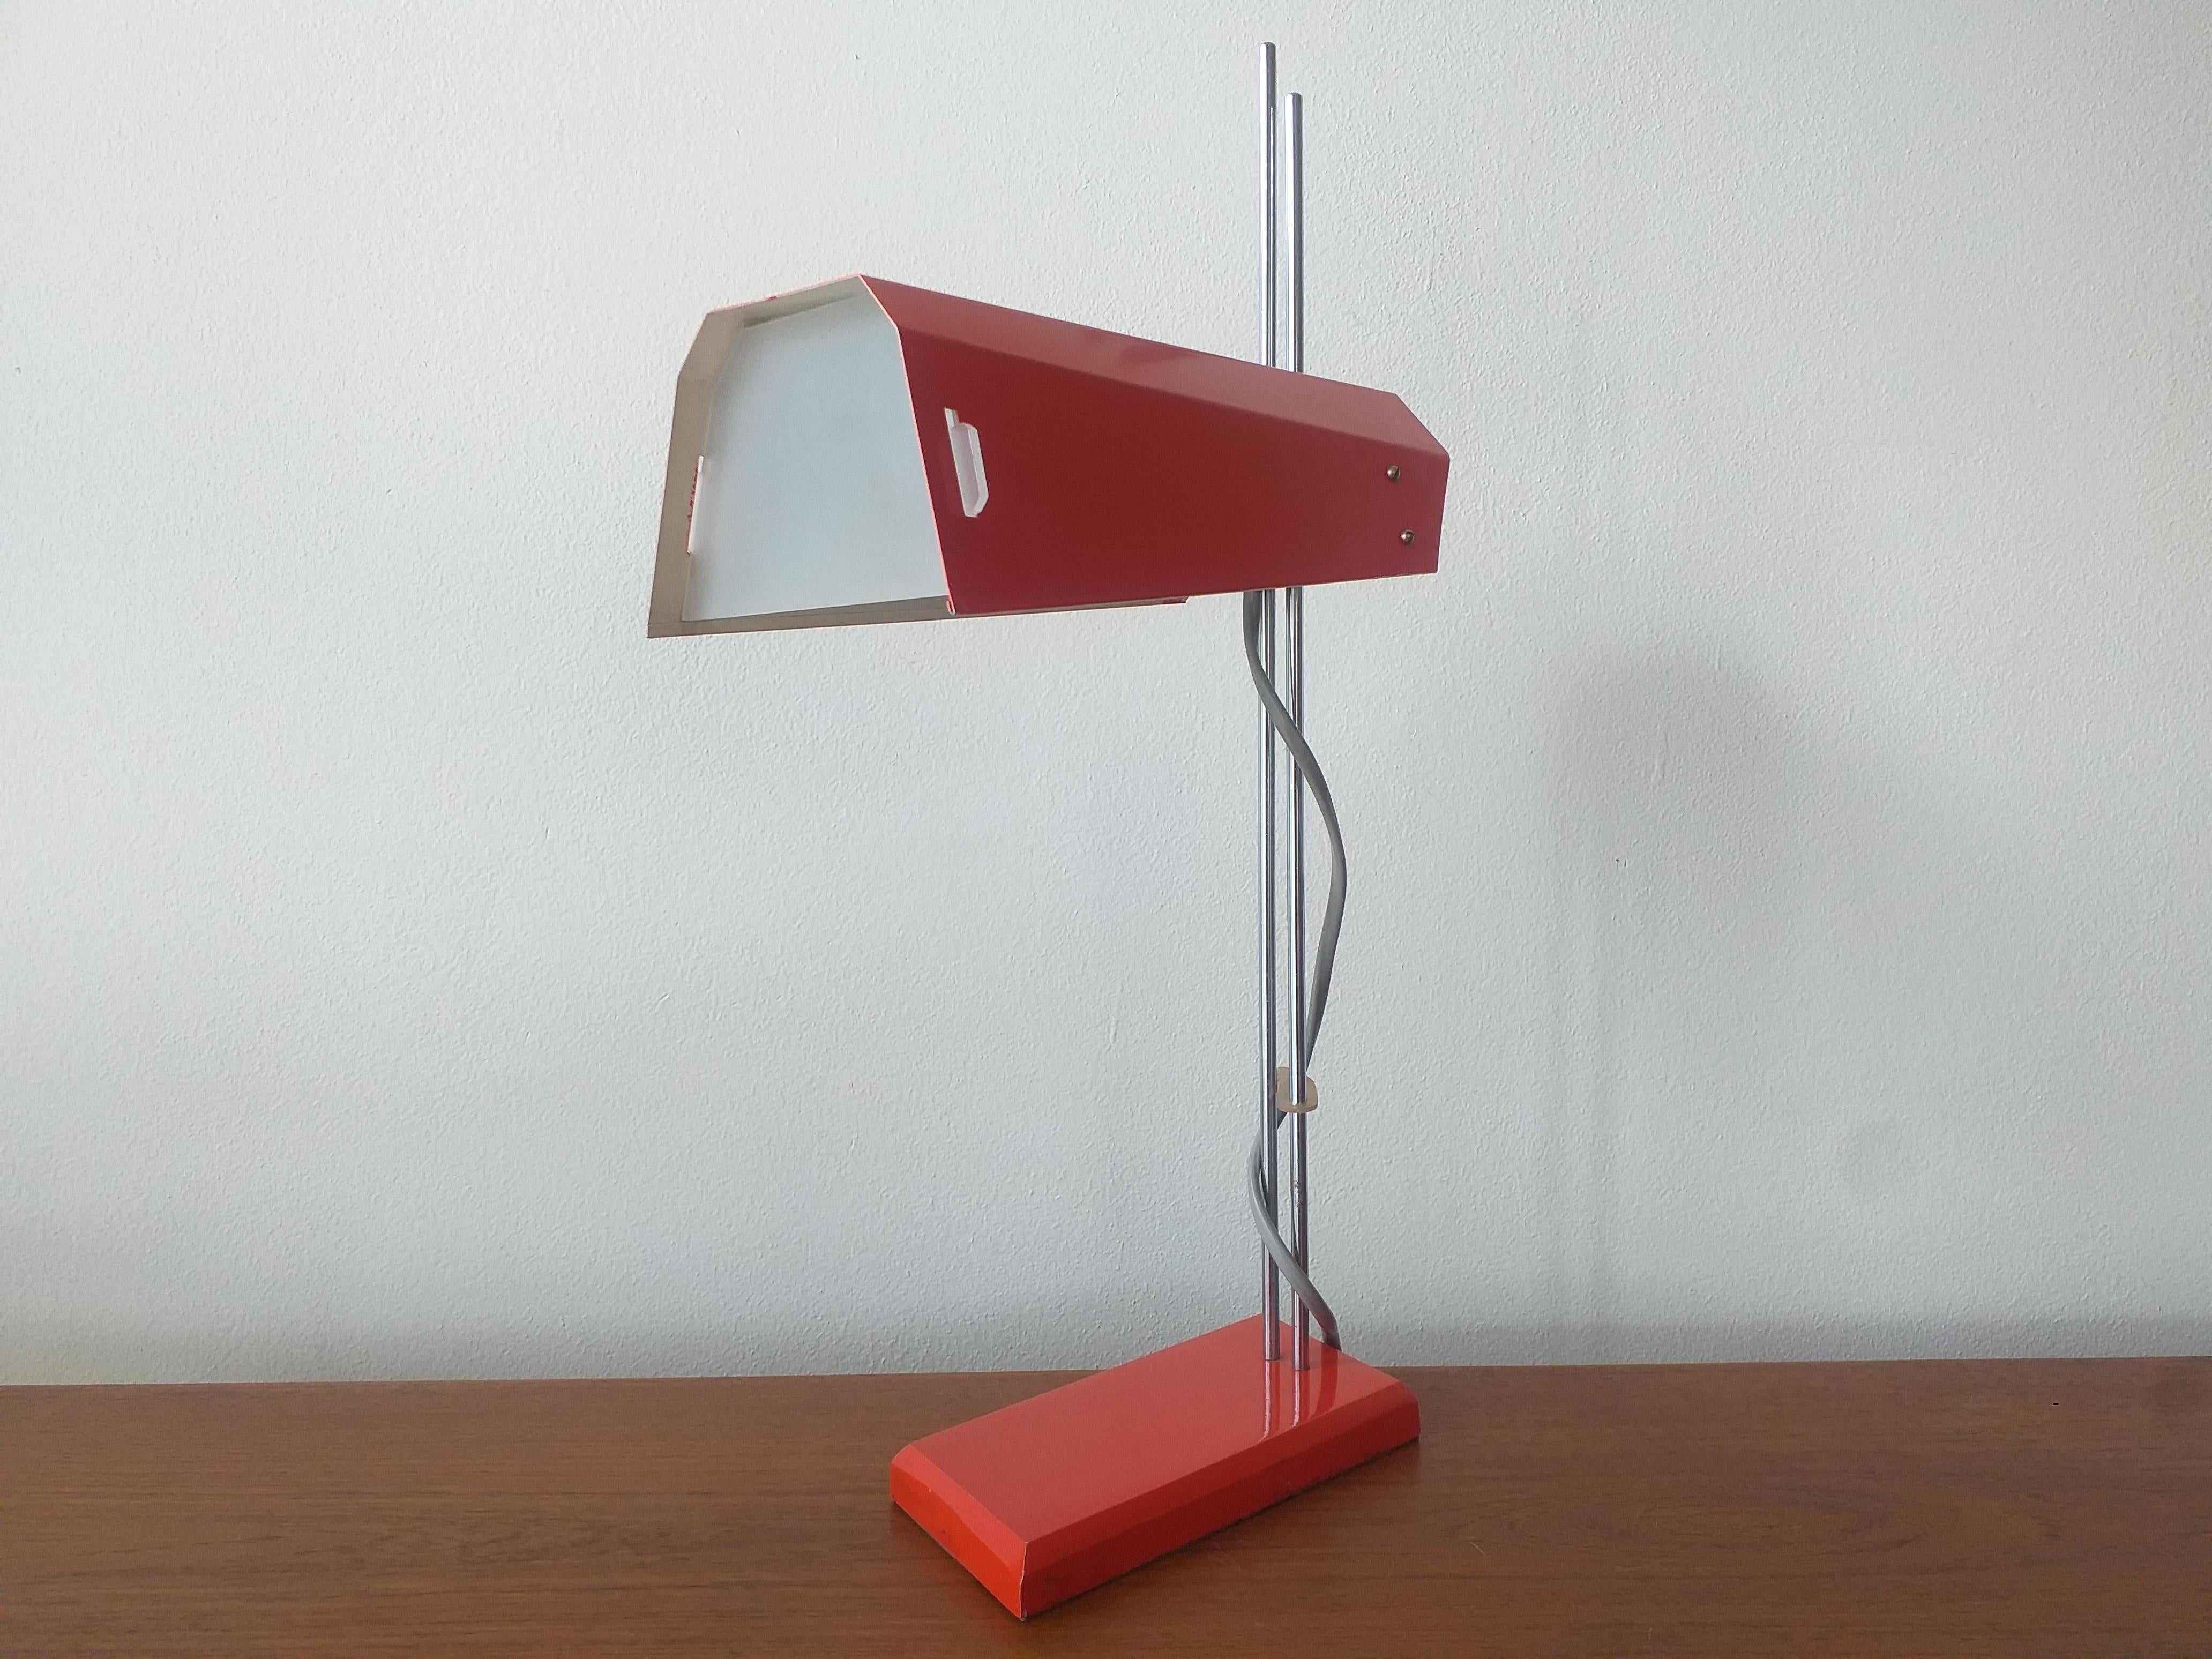 Metal Midcentury Table Lamp Lidokov Designed by Josef Hurka, 1970s For Sale